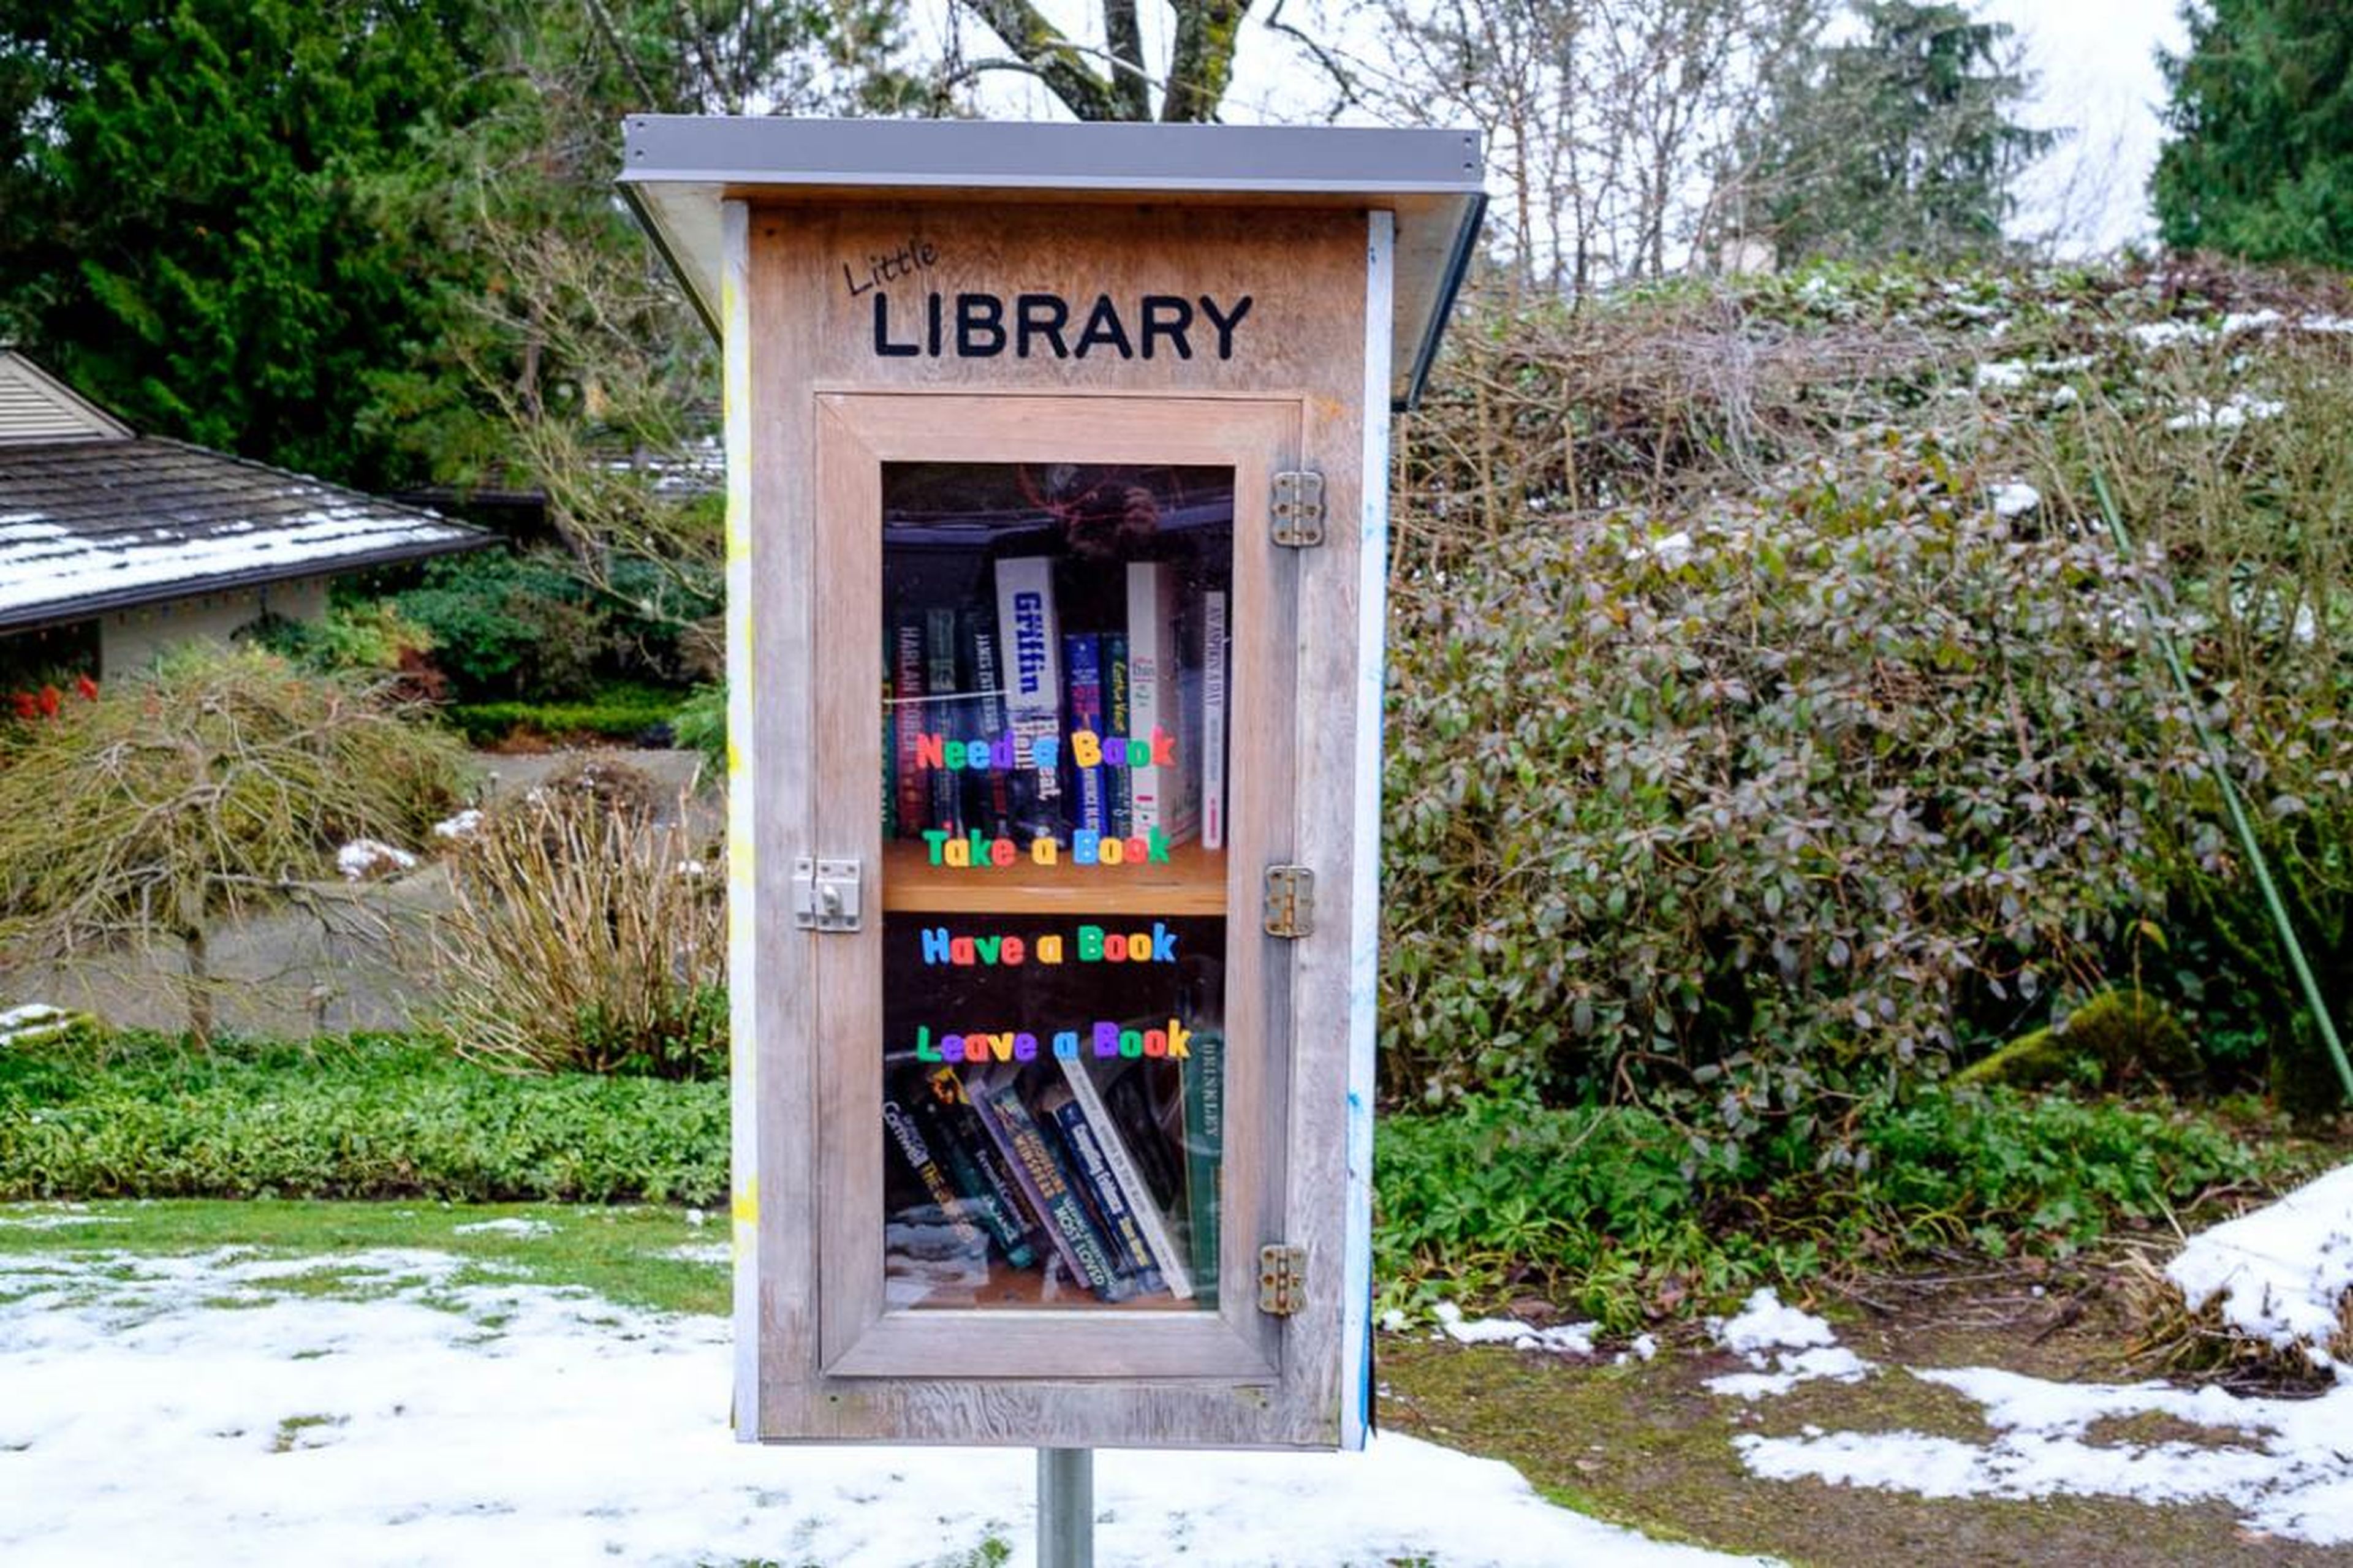 These "lending libraries" were dotted on some of the streets, and the town is filled with expansive and beautiful parks.